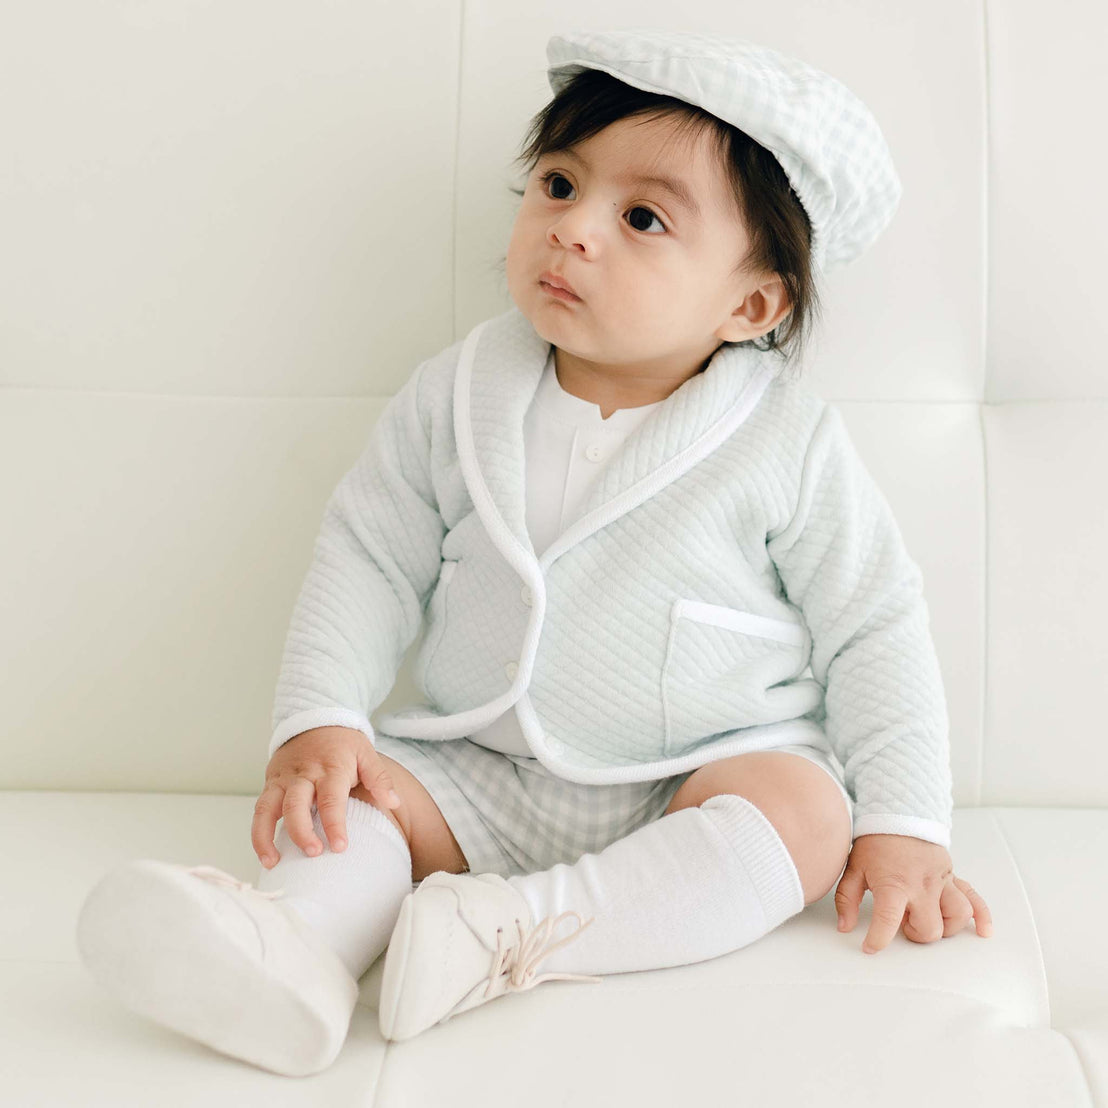 A baby in an Ian Cloud Shorts Set sits on a white couch, looking to the side with a curious expression.